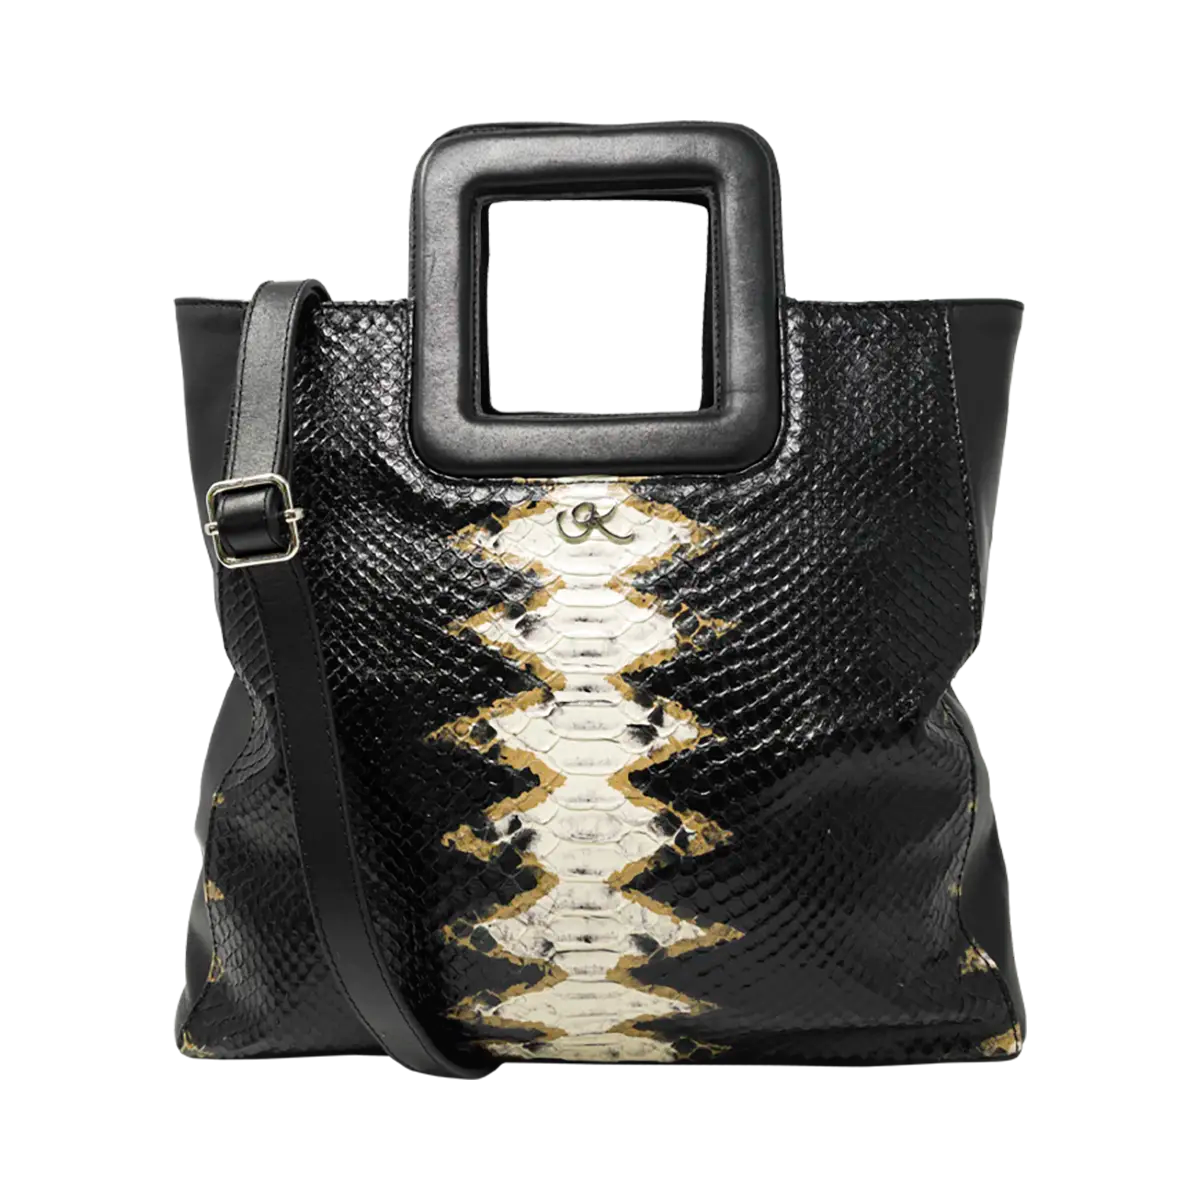 large diamond tsn ltd leather print handbag with a square handle. Accessory for women in San Diego, CA.